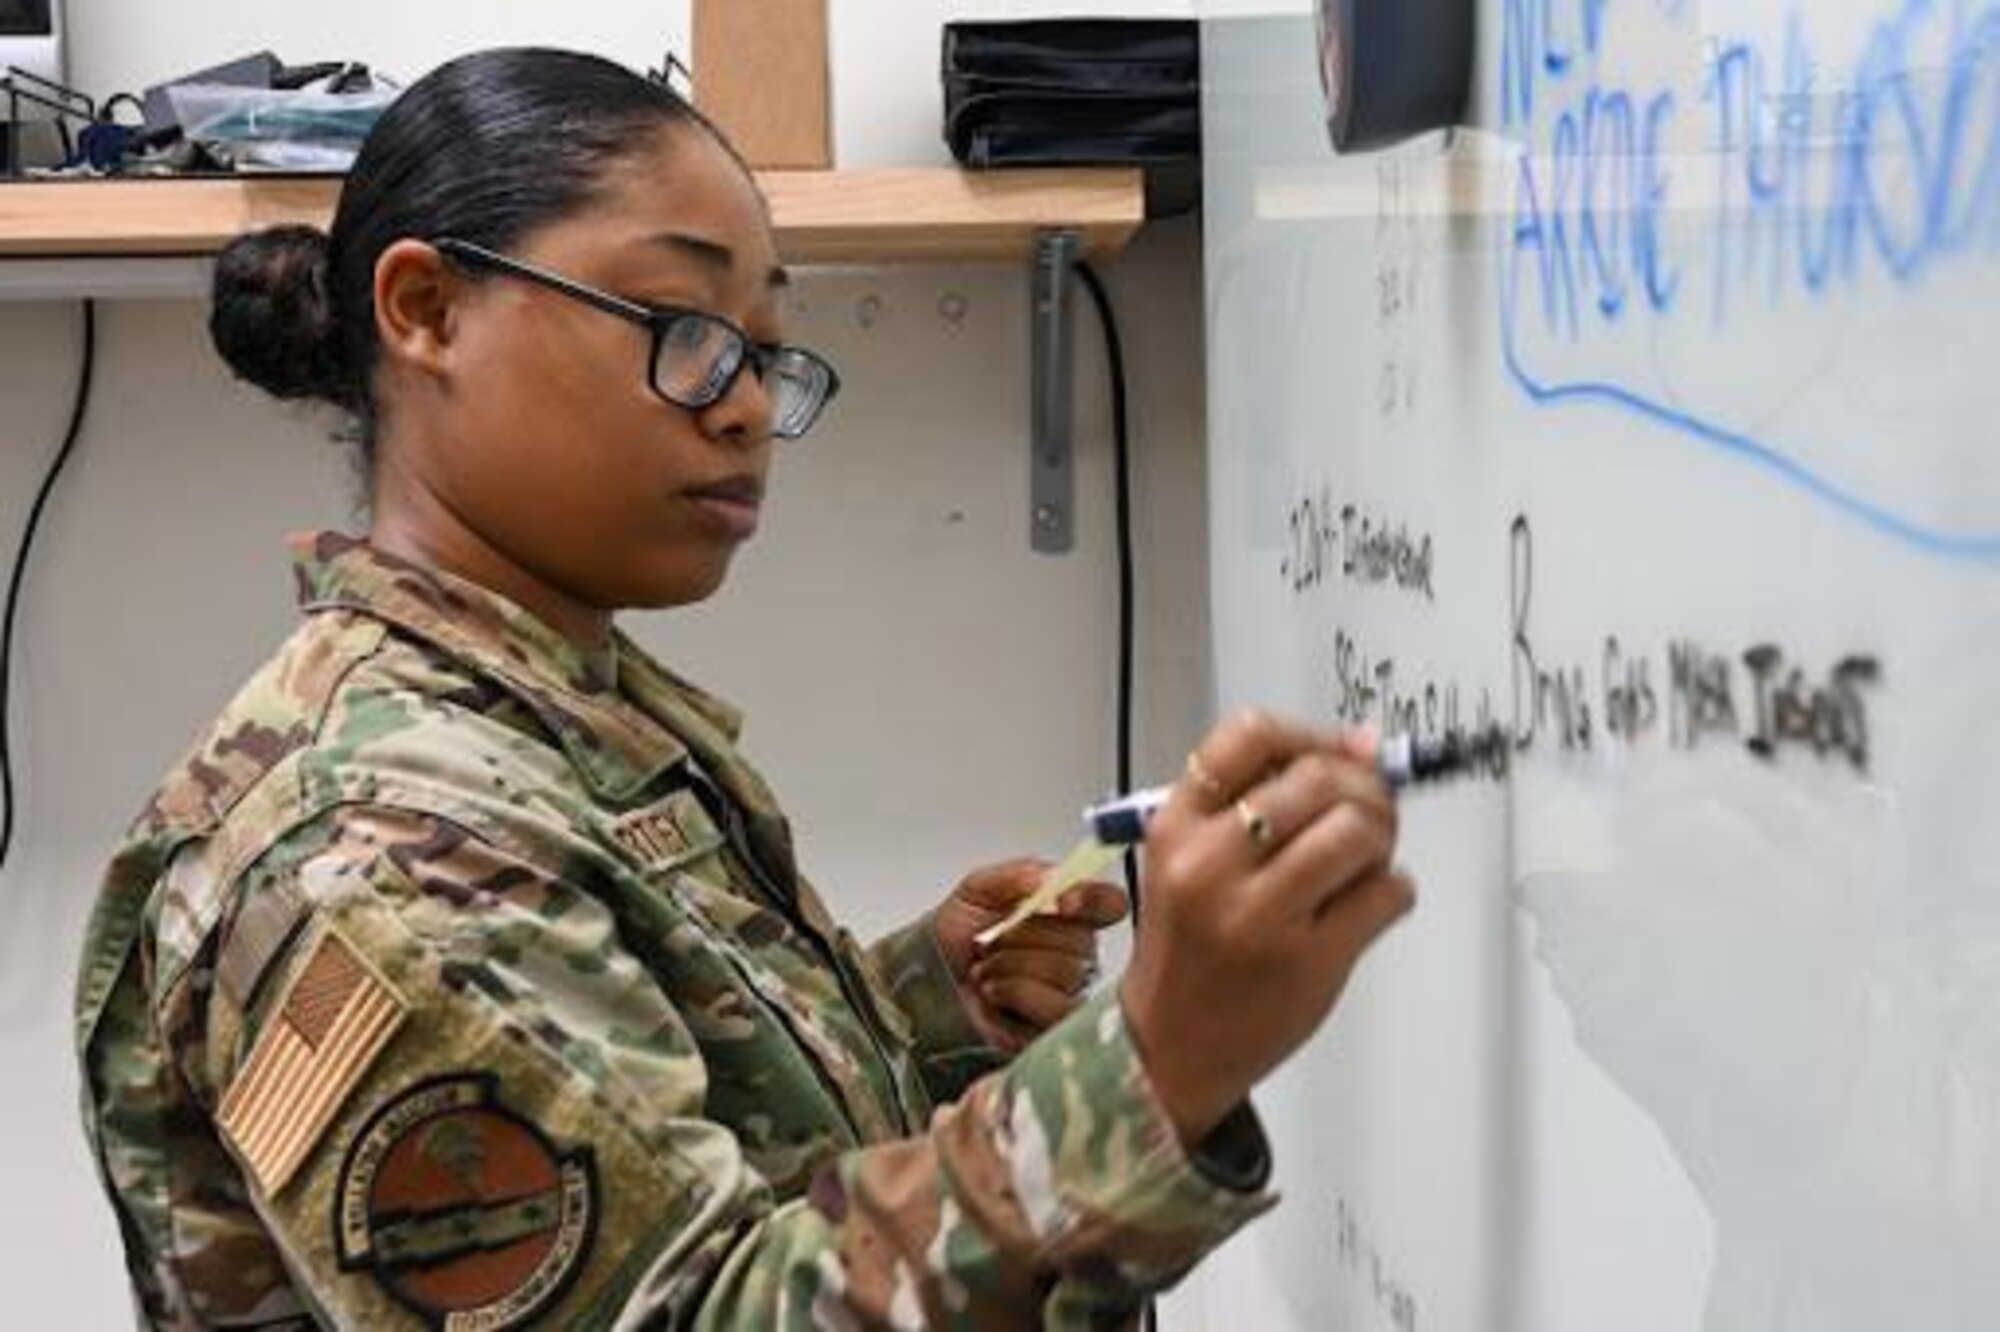 Staff Sgt. Tiara Hartley, 113th Wing, D.C. Air National Guard, writes on a whiteboard as she tracks information related to her job as a Communications Focal Point representative.